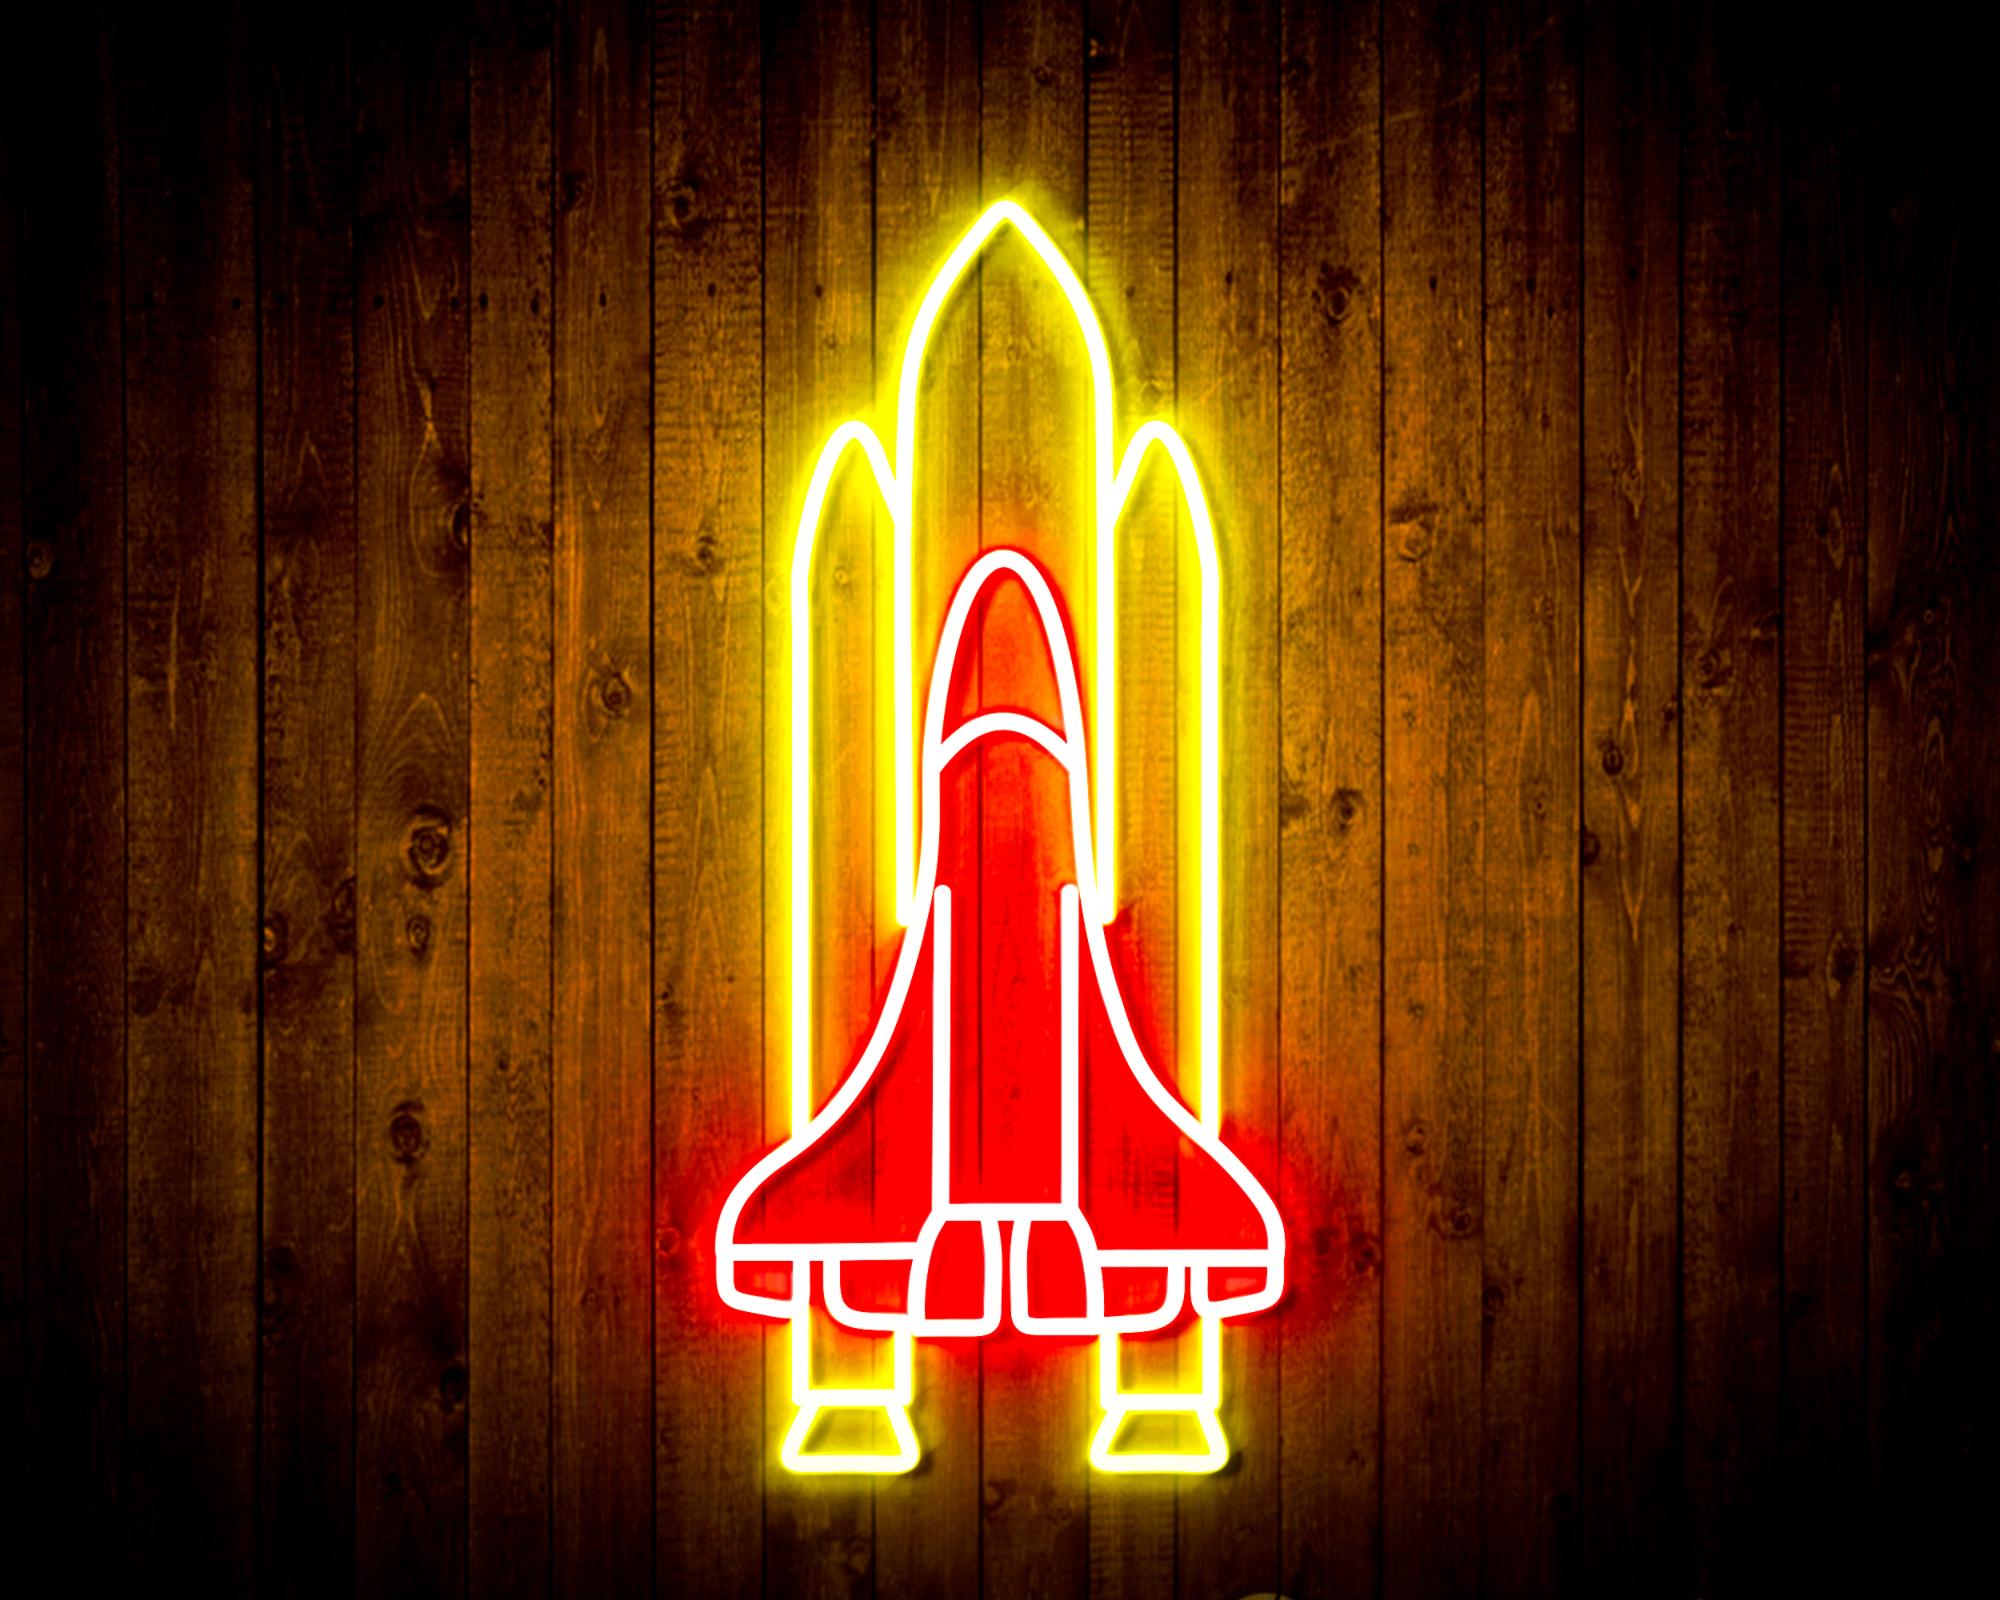 Spaceship LED Neon Sign Wall Light